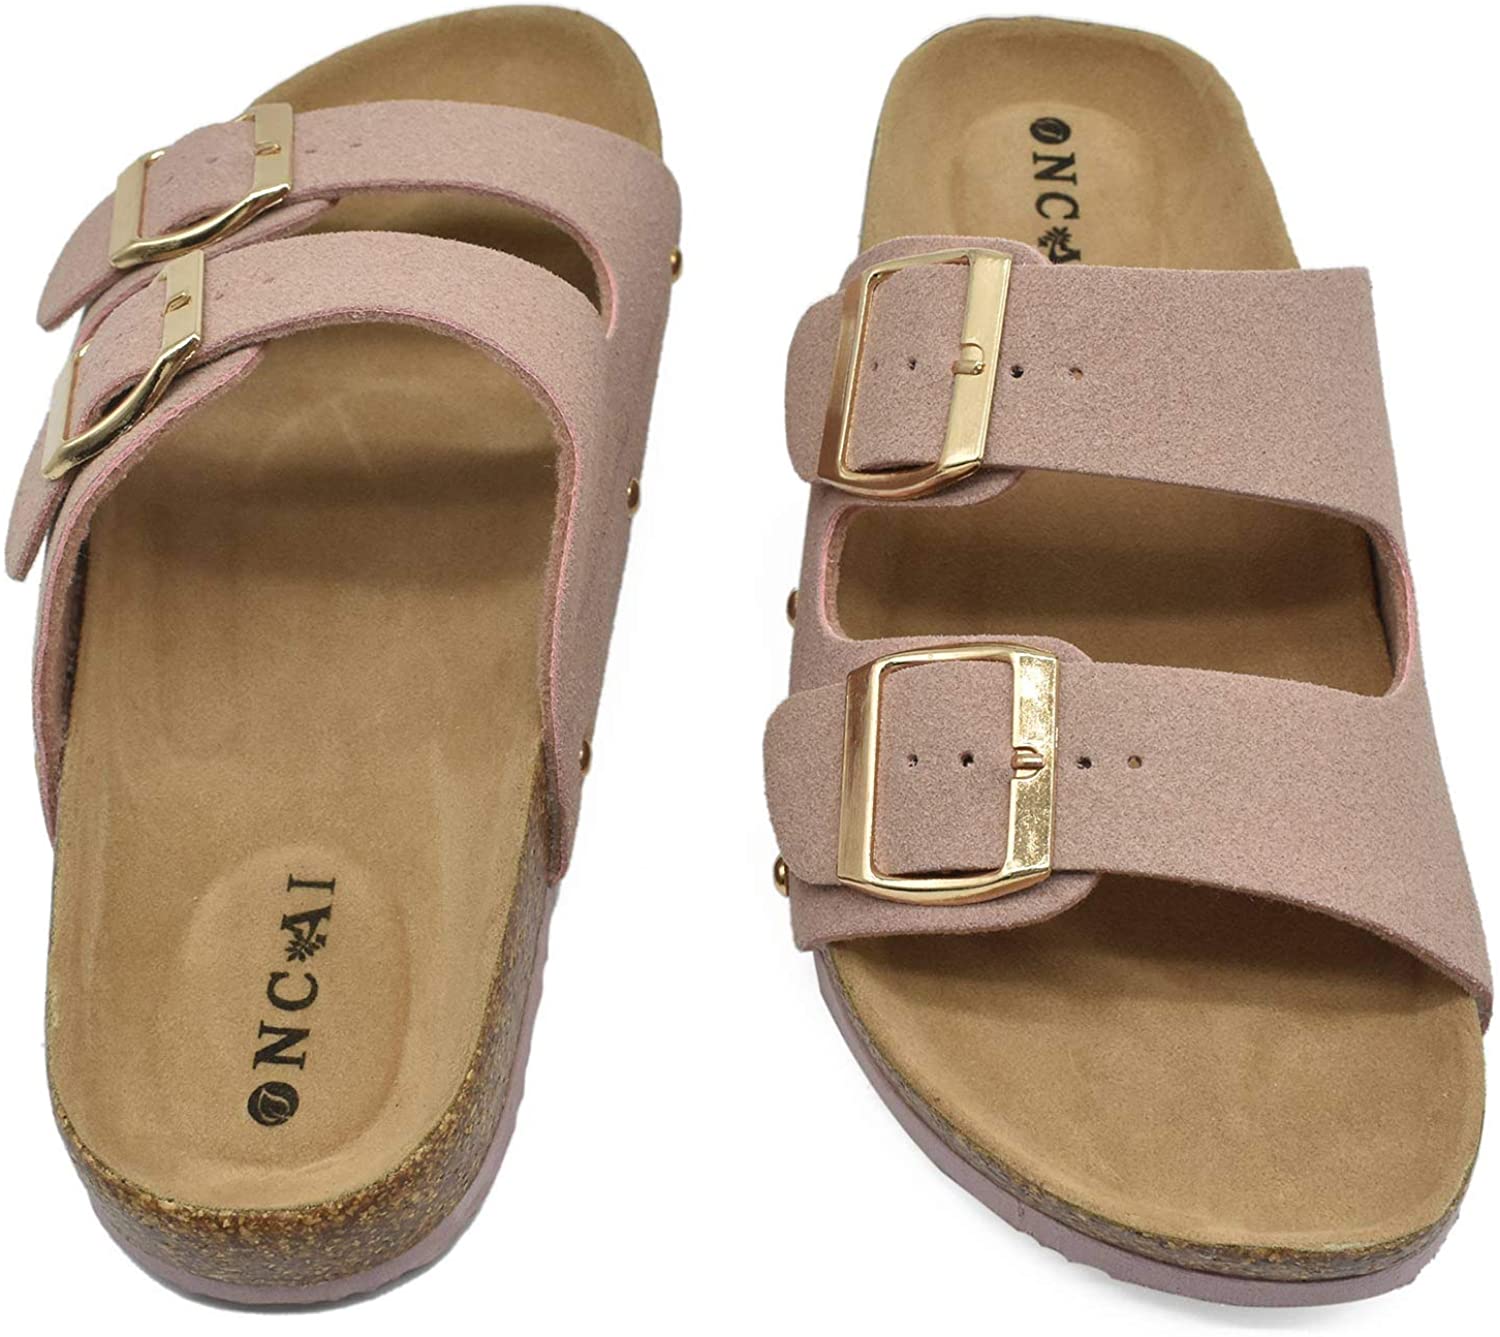 arch support sandals for women